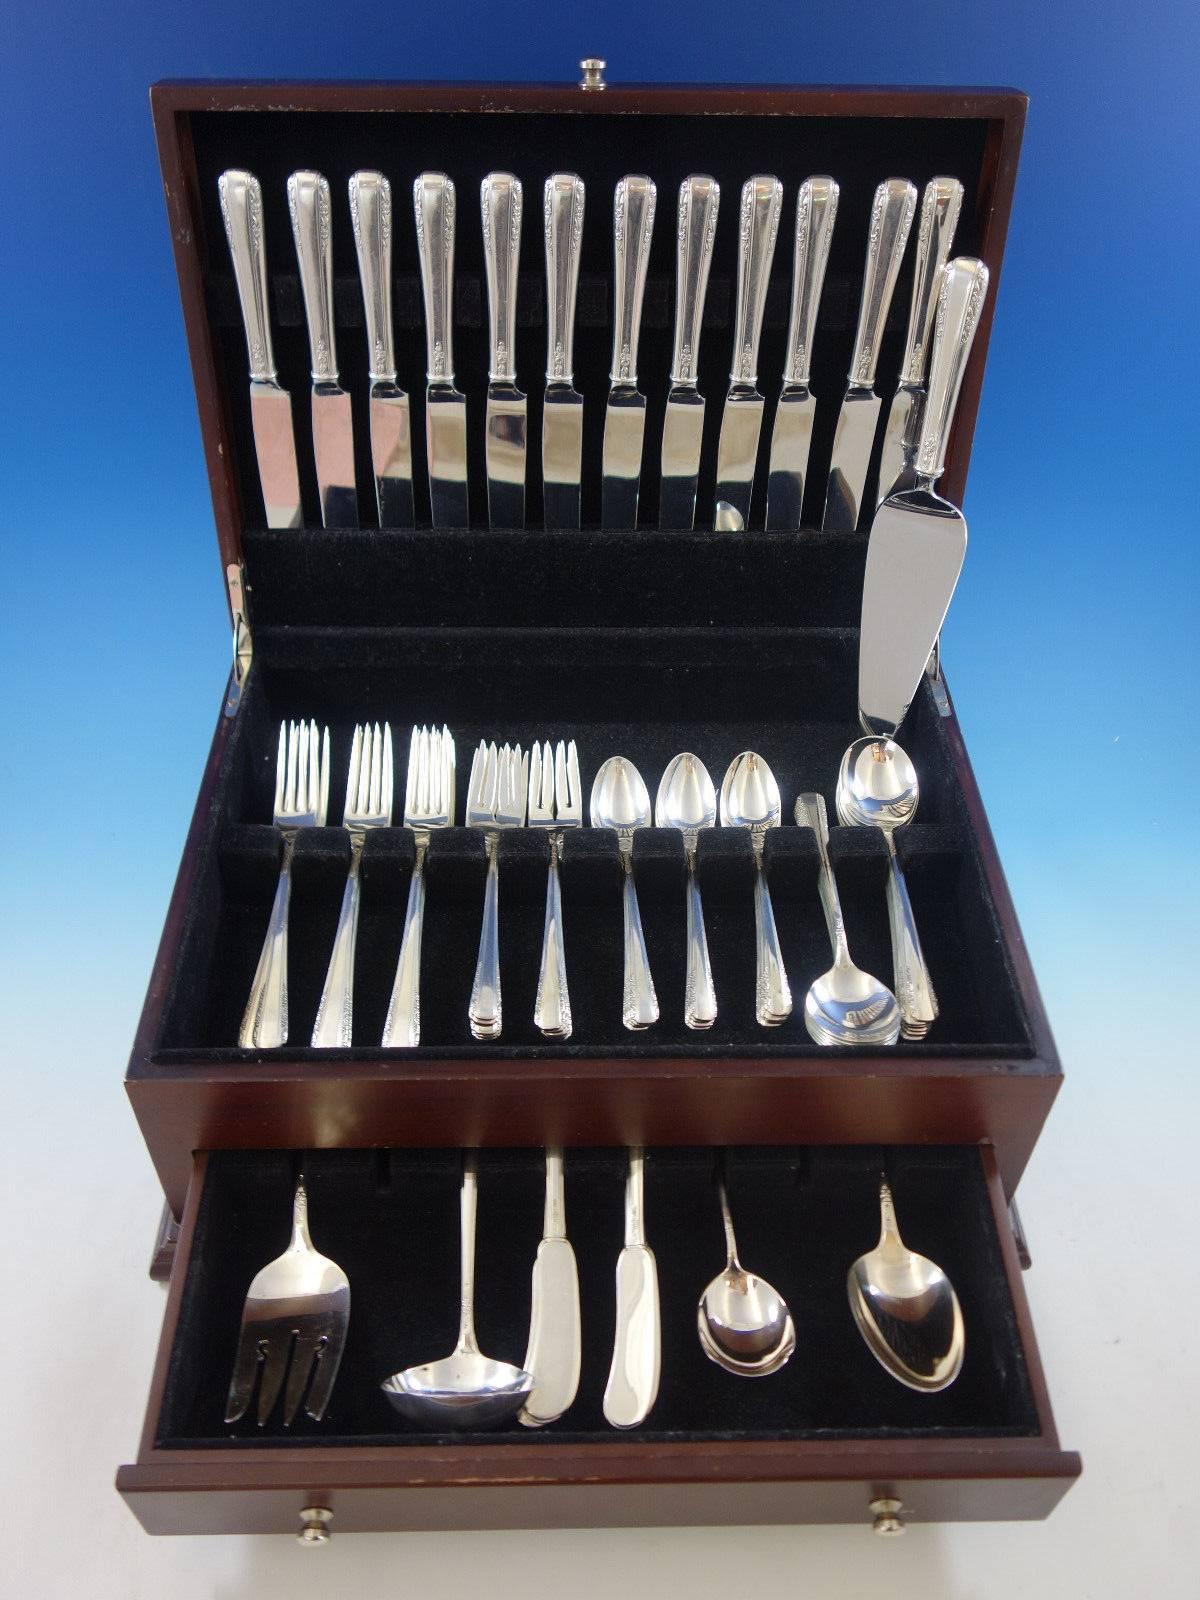 Courtship by International sterling silver flatware set of 77 pieces. This set includes: 

12 knives, 9 1/8